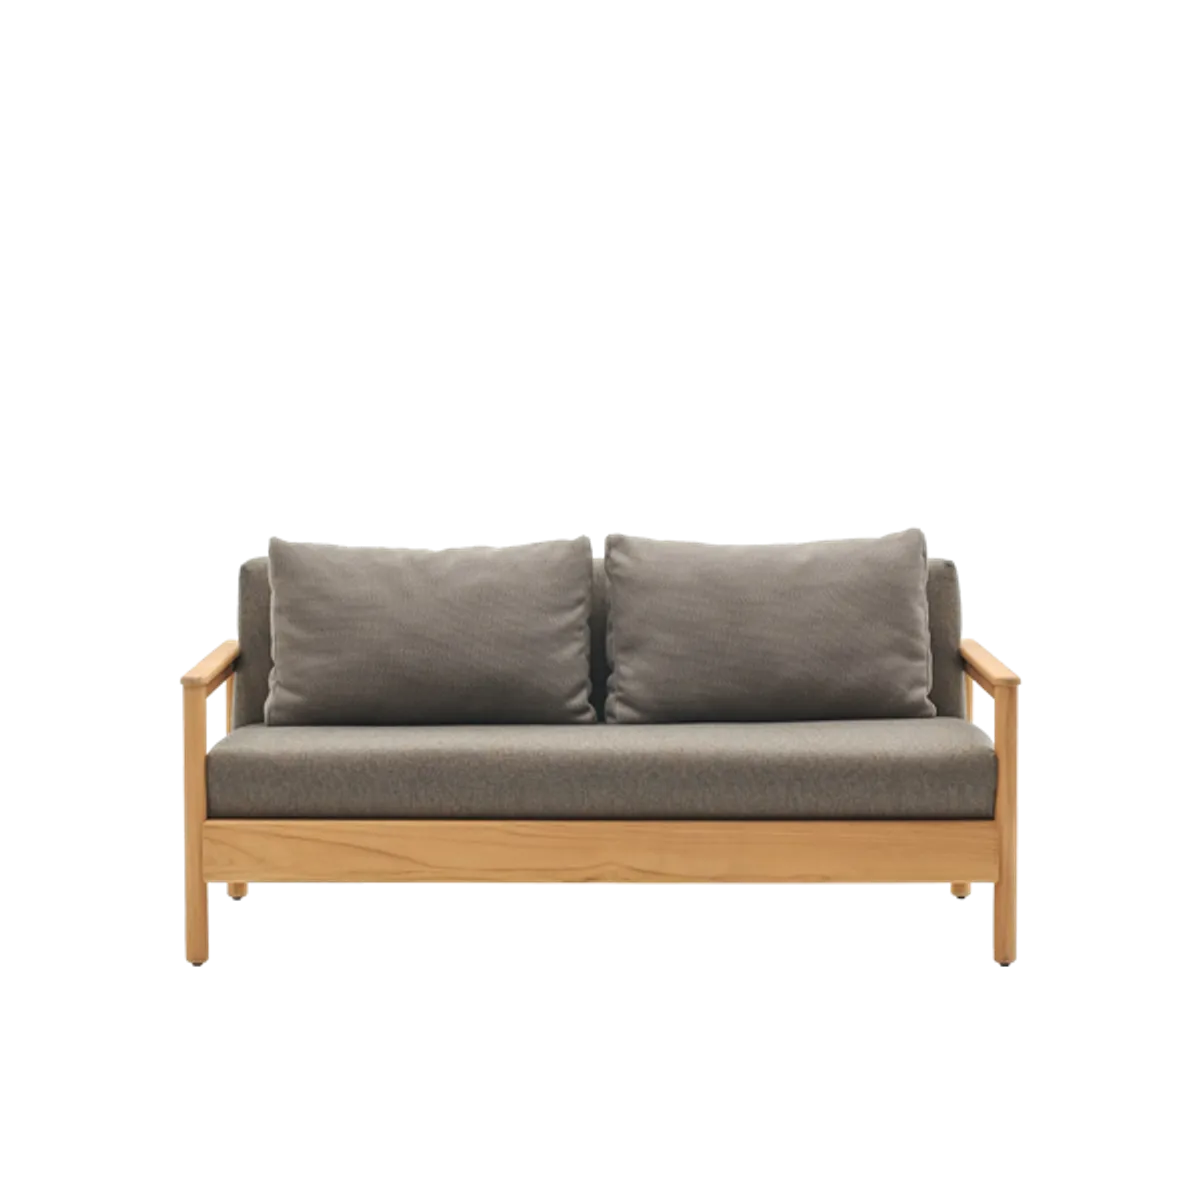 Balia sofa Inside Out Contracts